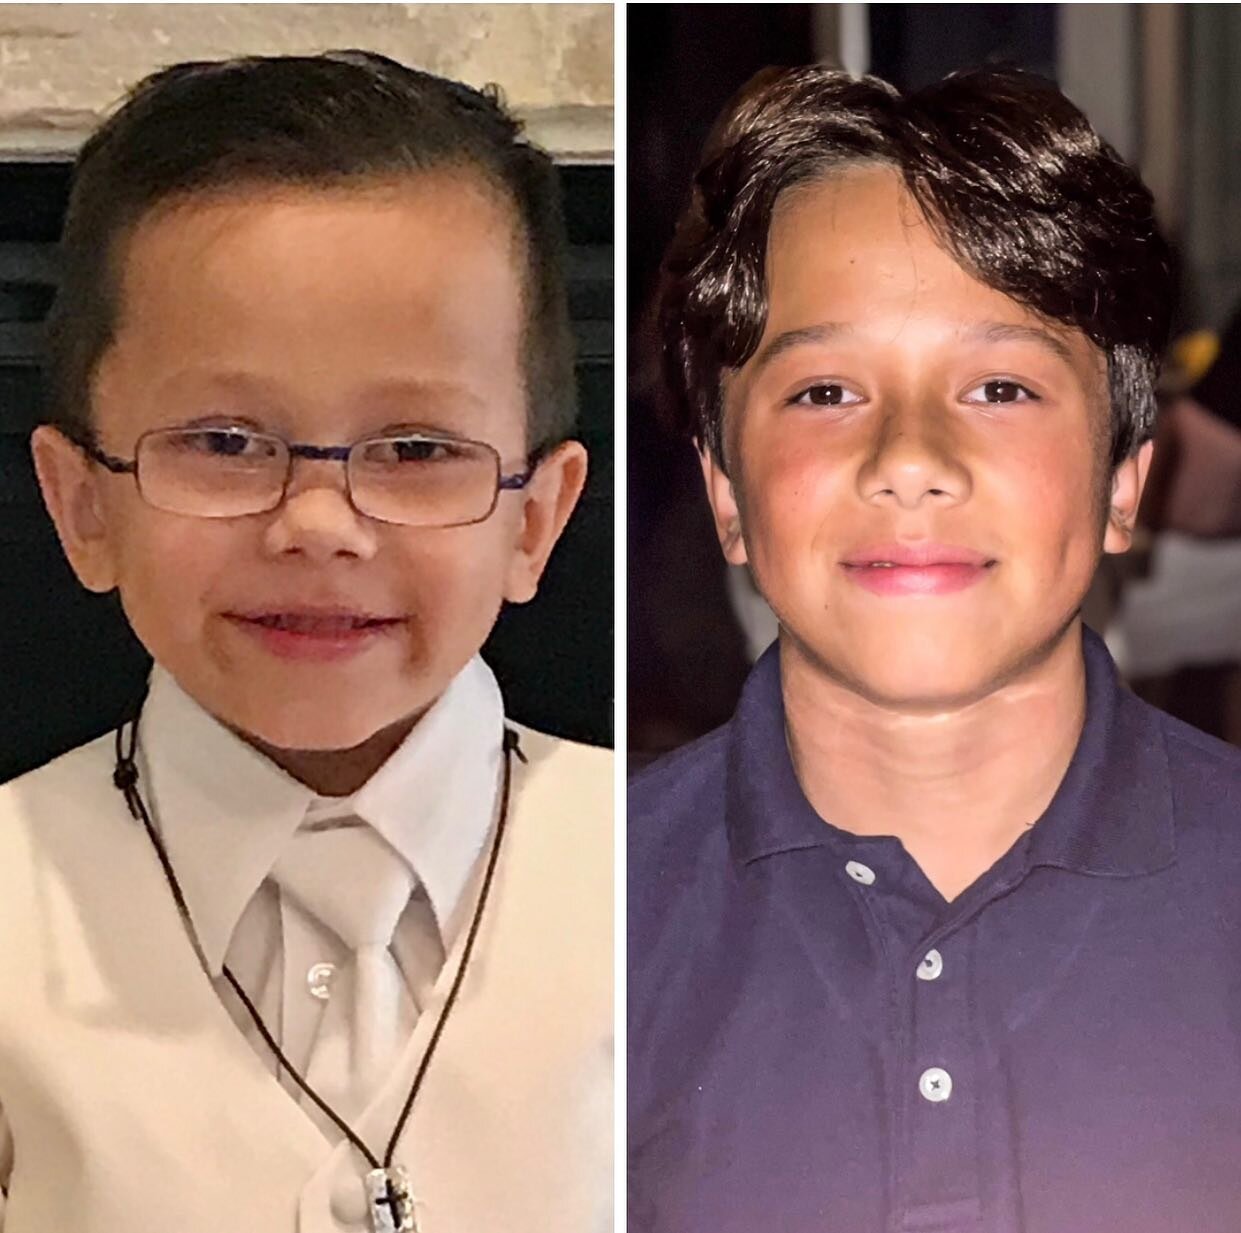 From absolutely adorable kid with glasses to very handsome pre-teen. 

Such a joy to watch Colton grow up and come into his own. ❤️🙏

#GrowingUp #Preteen #CyrKid